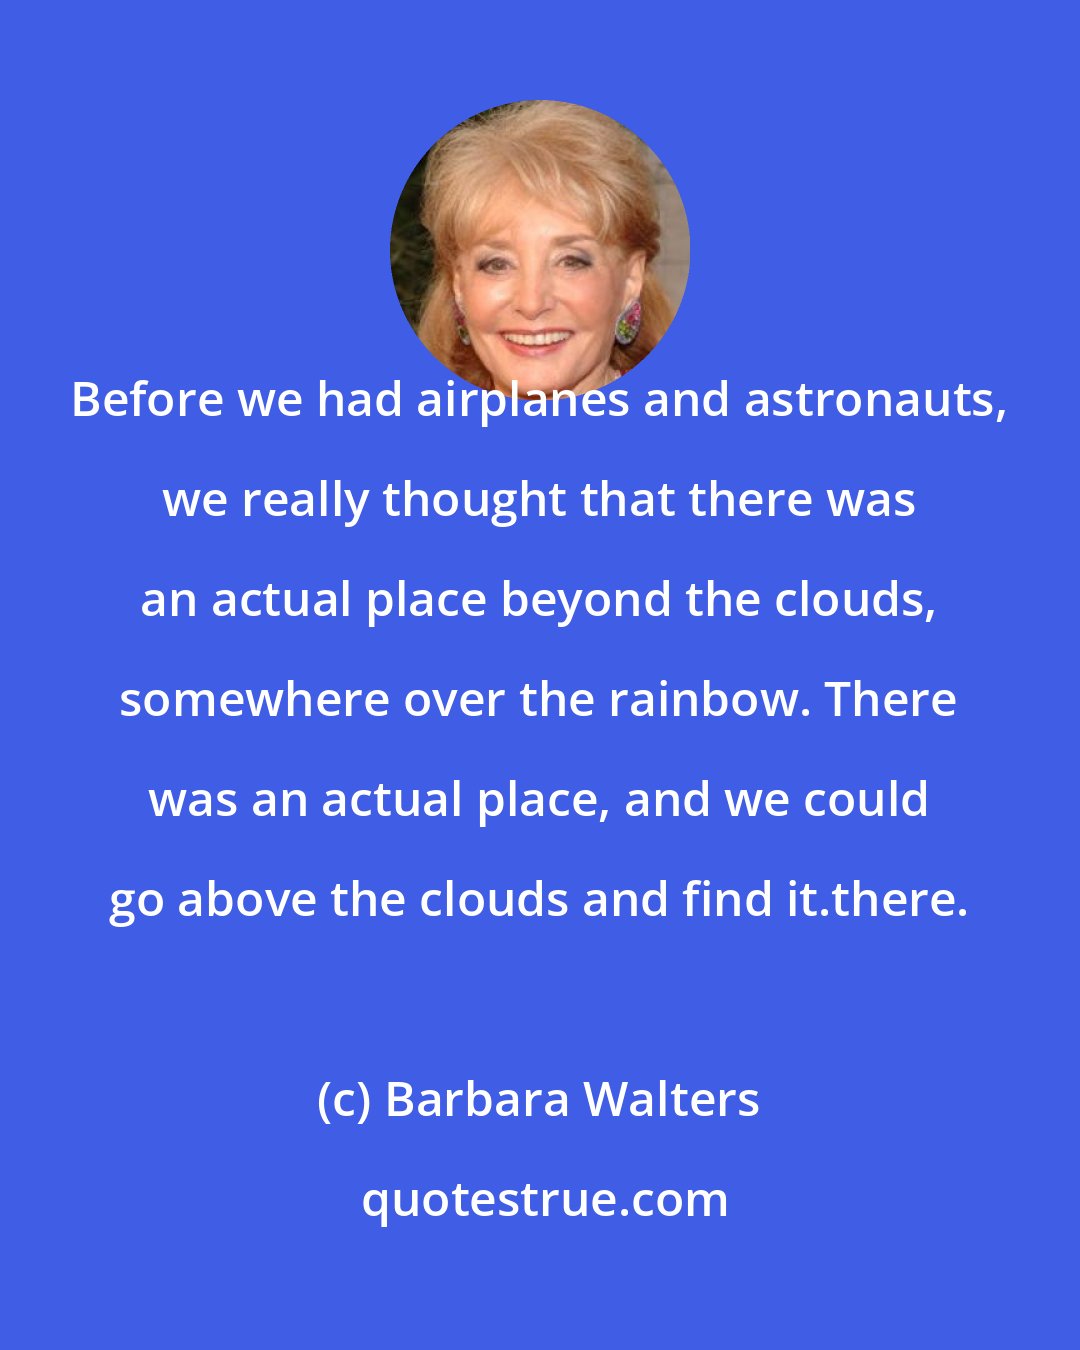 Barbara Walters: Before we had airplanes and astronauts, we really thought that there was an actual place beyond the clouds, somewhere over the rainbow. There was an actual place, and we could go above the clouds and find it.there.